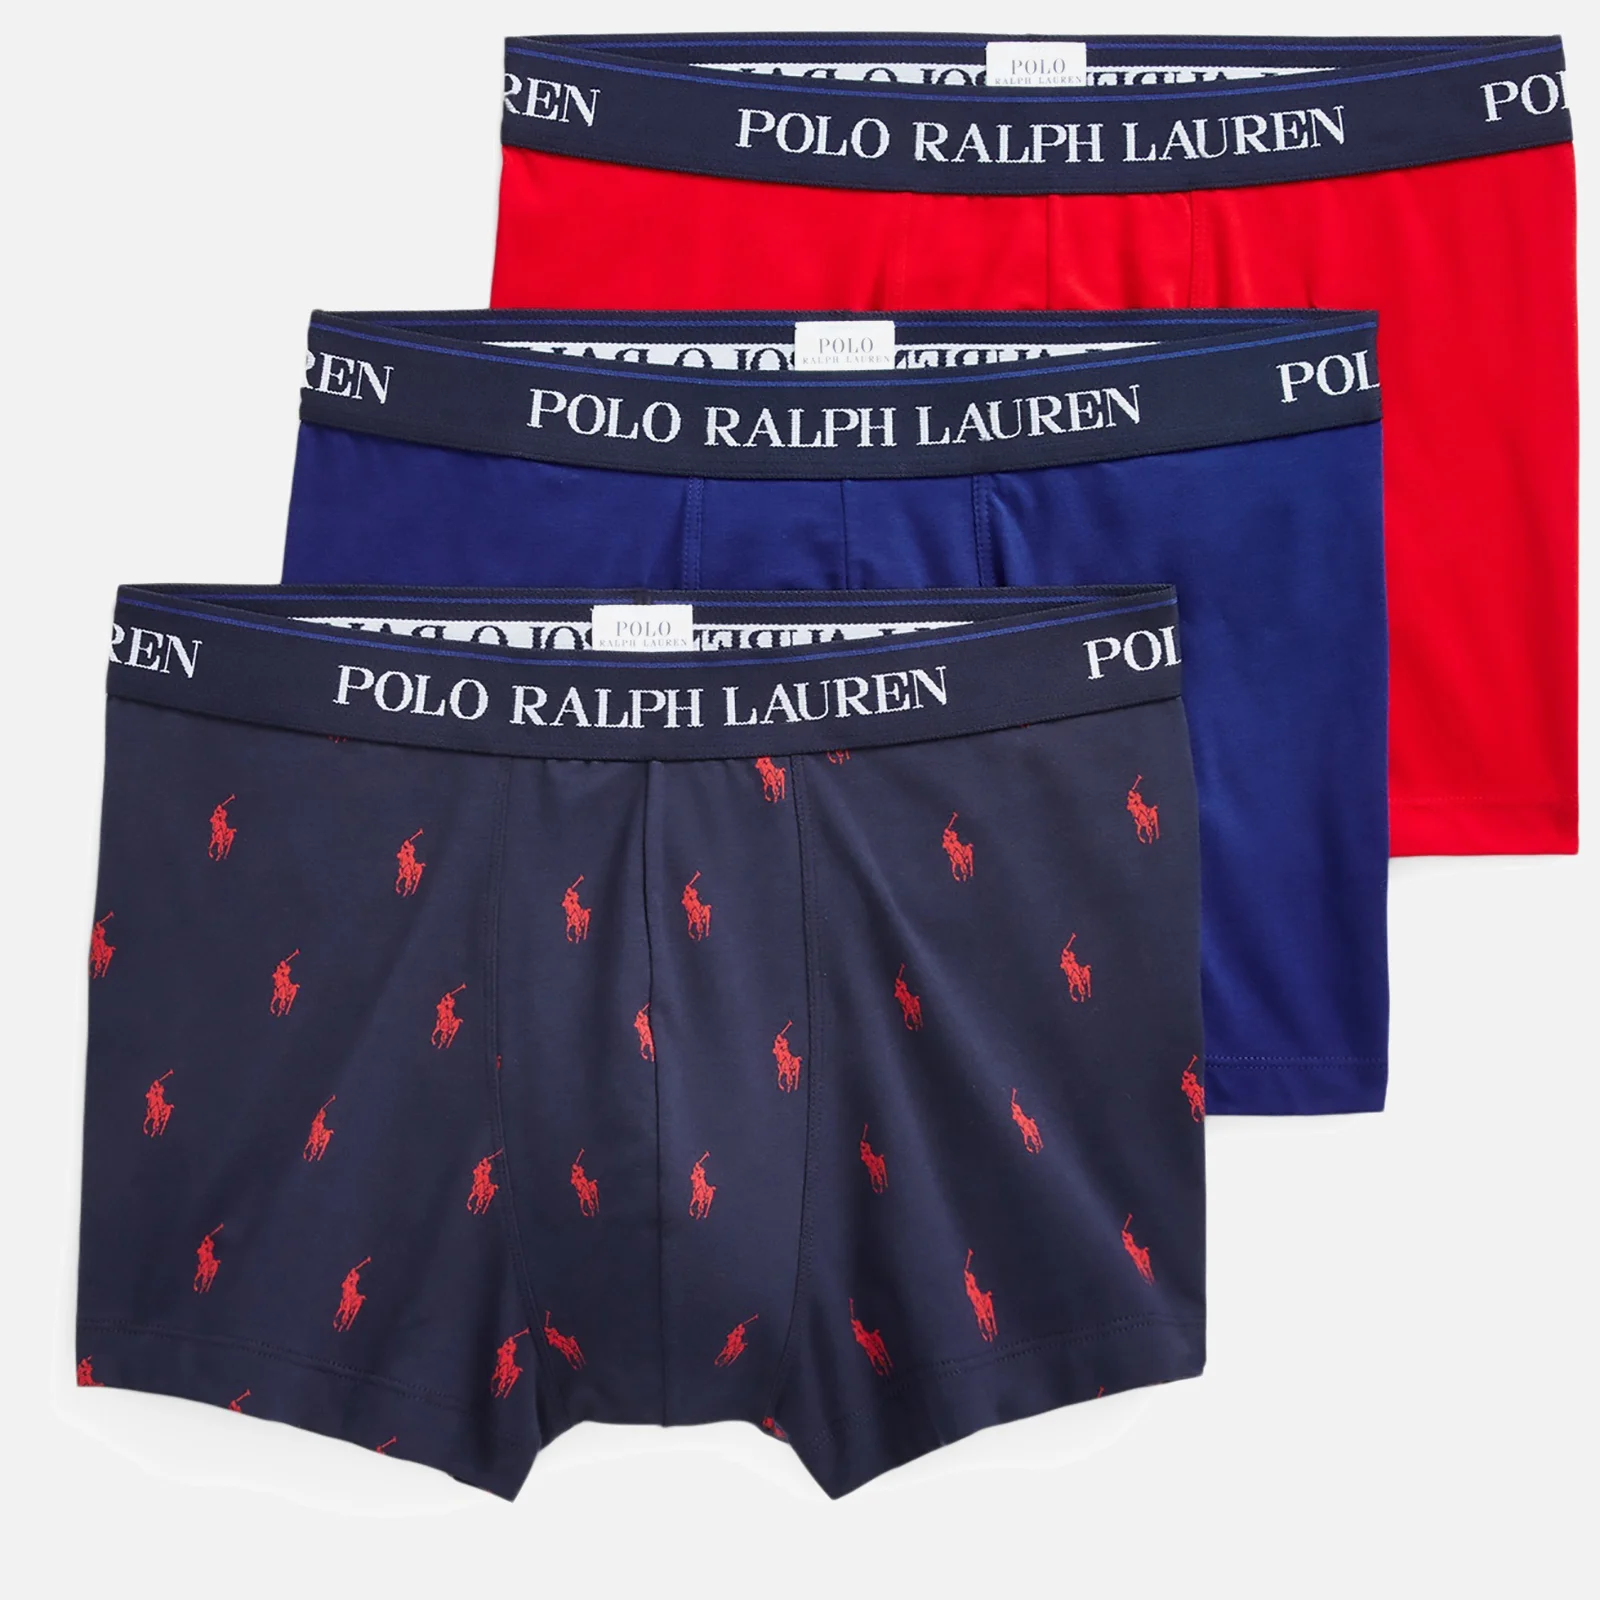 Polo Ralph Lauren Men's Classic 3 Pack Trunks - Newport Navy Allover/Heritage Royal/Regal Red Image 1